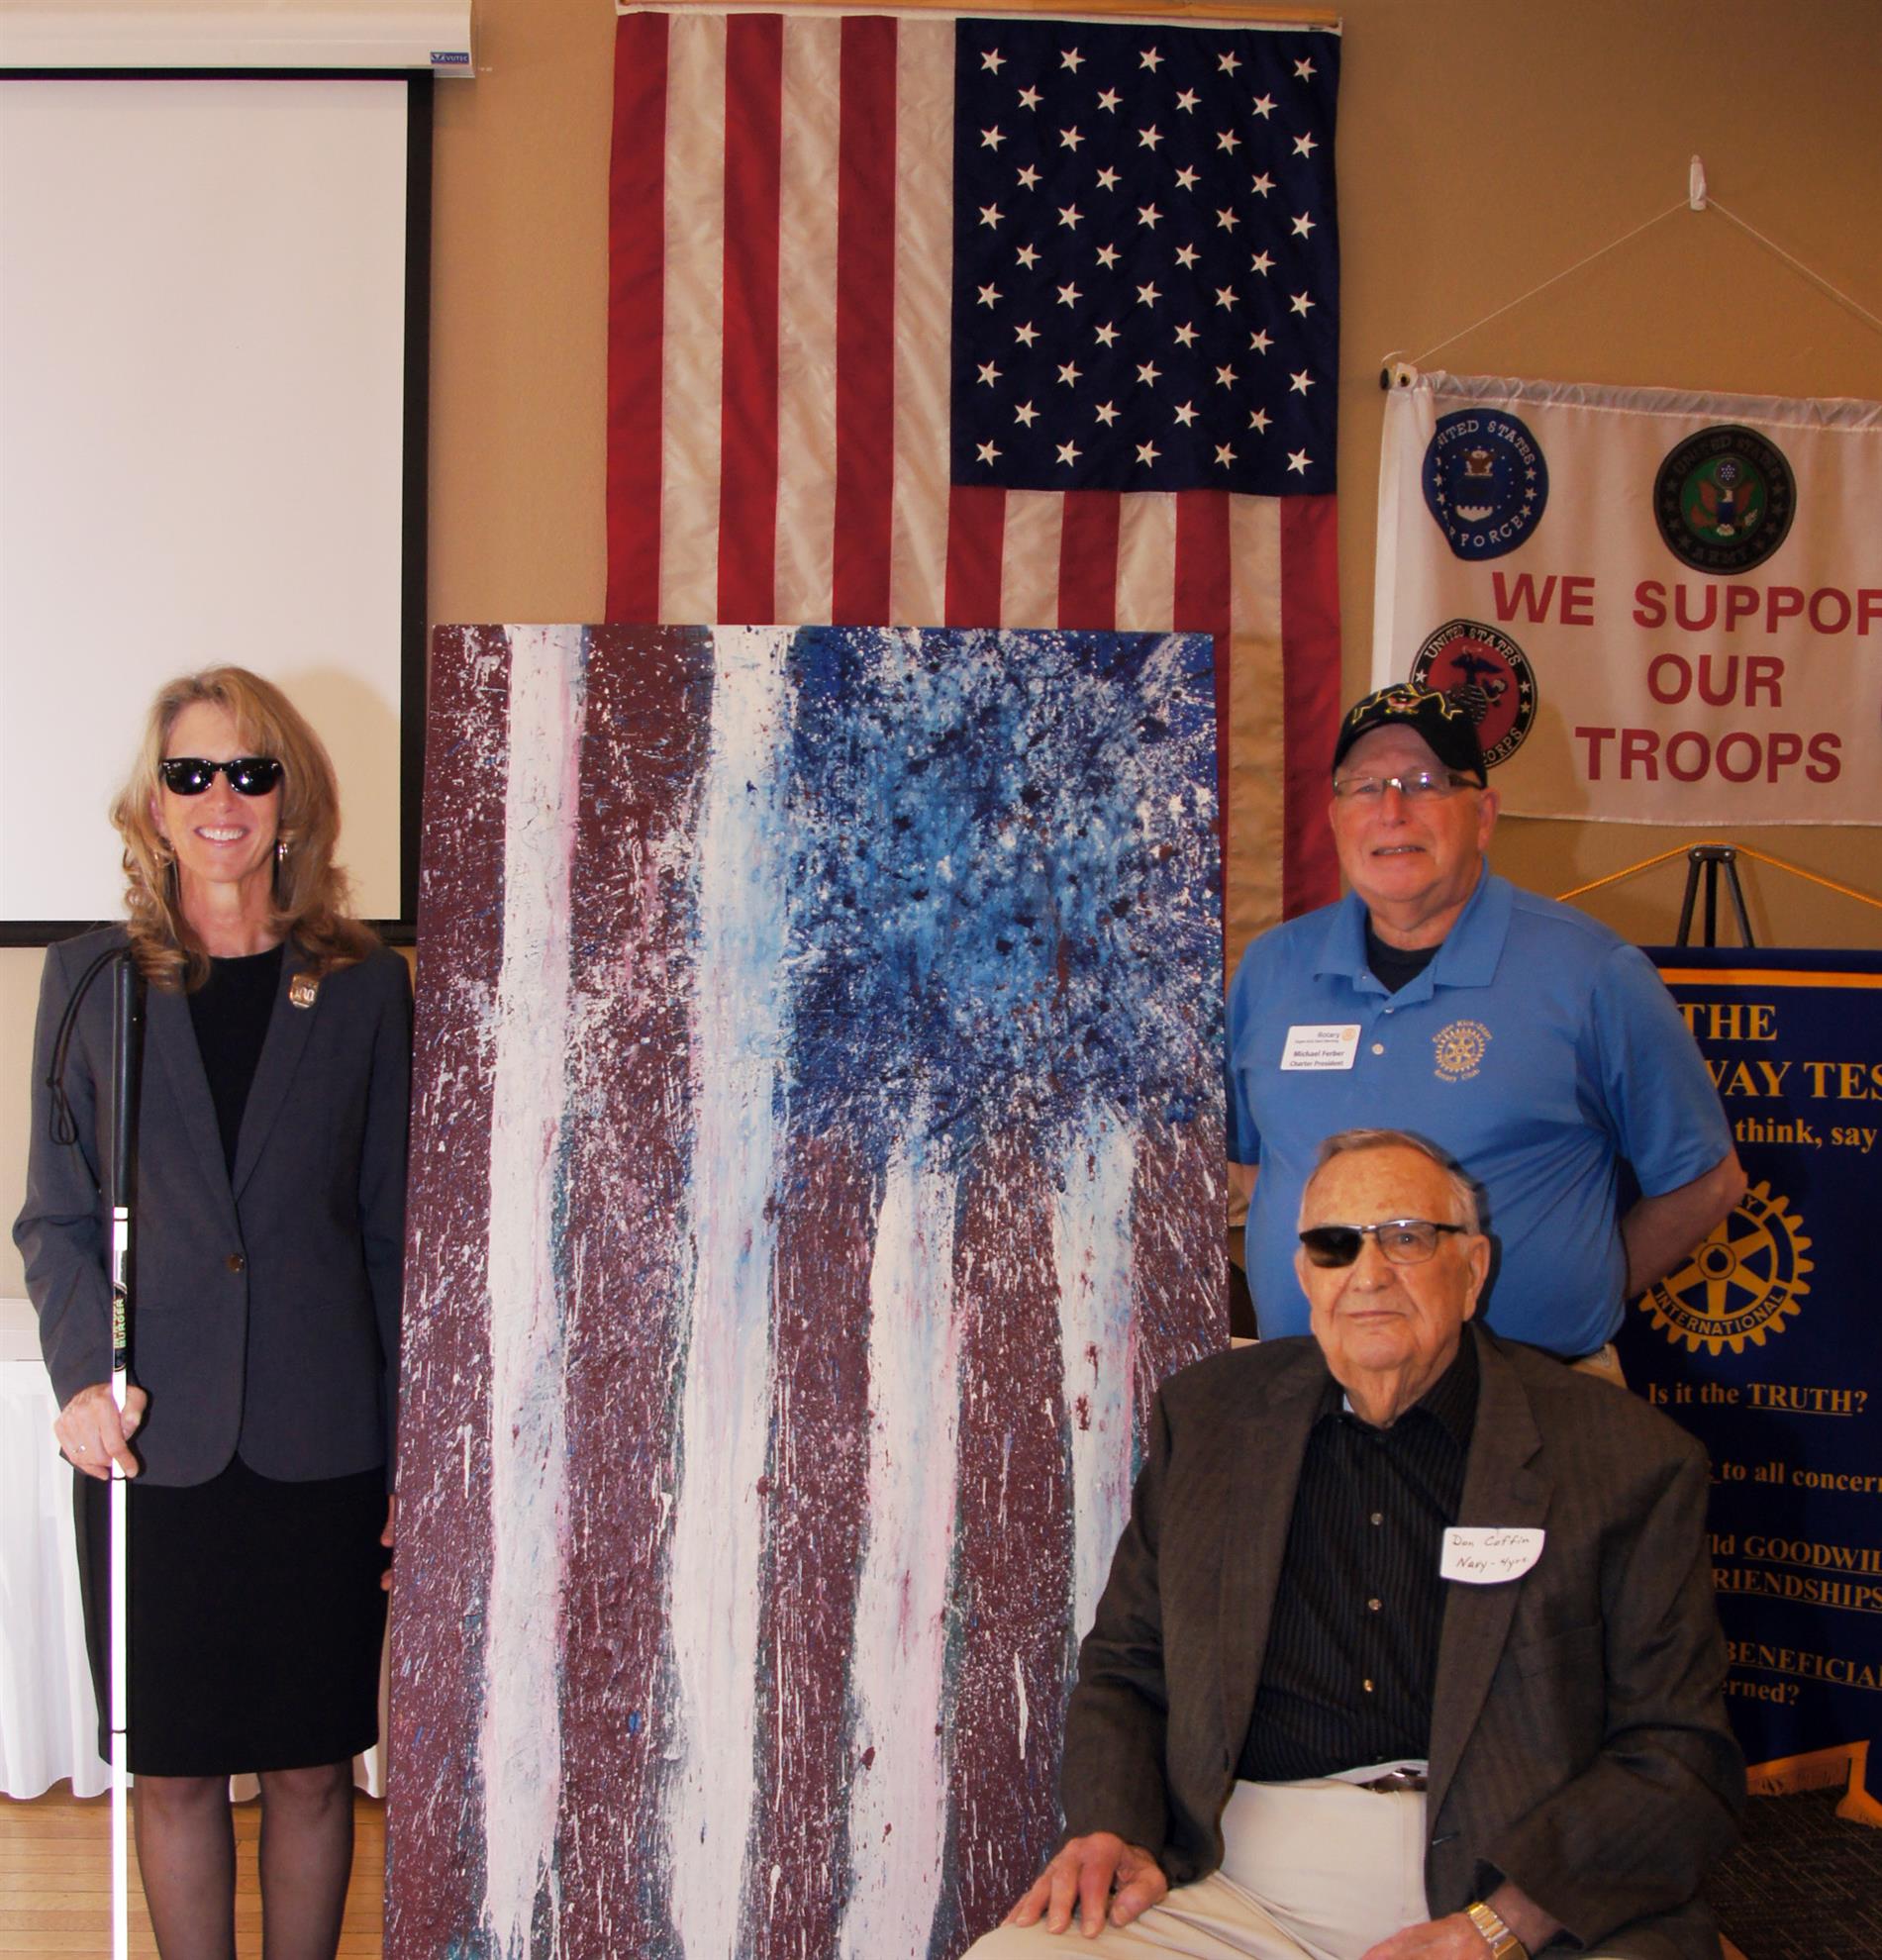 With a backdrop of the American flag and the Annie Young painting depicting the American Flag, Veterans (from left) Annie Young, Don Coffin and Mike Ferber were honored by the Rotary Club of Eagan (Noon Club) and the Eagan Kick-Start Club for Veterans Day 2021.  A $200 certificate was given to the following charities as designated by each Veteran, Salvation Army (Coffin), Silent Warrior Project Burnsville (Young) and Can Do Canines (Ferber). Community organizations supporting Veterans were recognized, Commons on Marice, Eagan Men’s Chorus and the Rotary Club of Minnesota Veterans.  